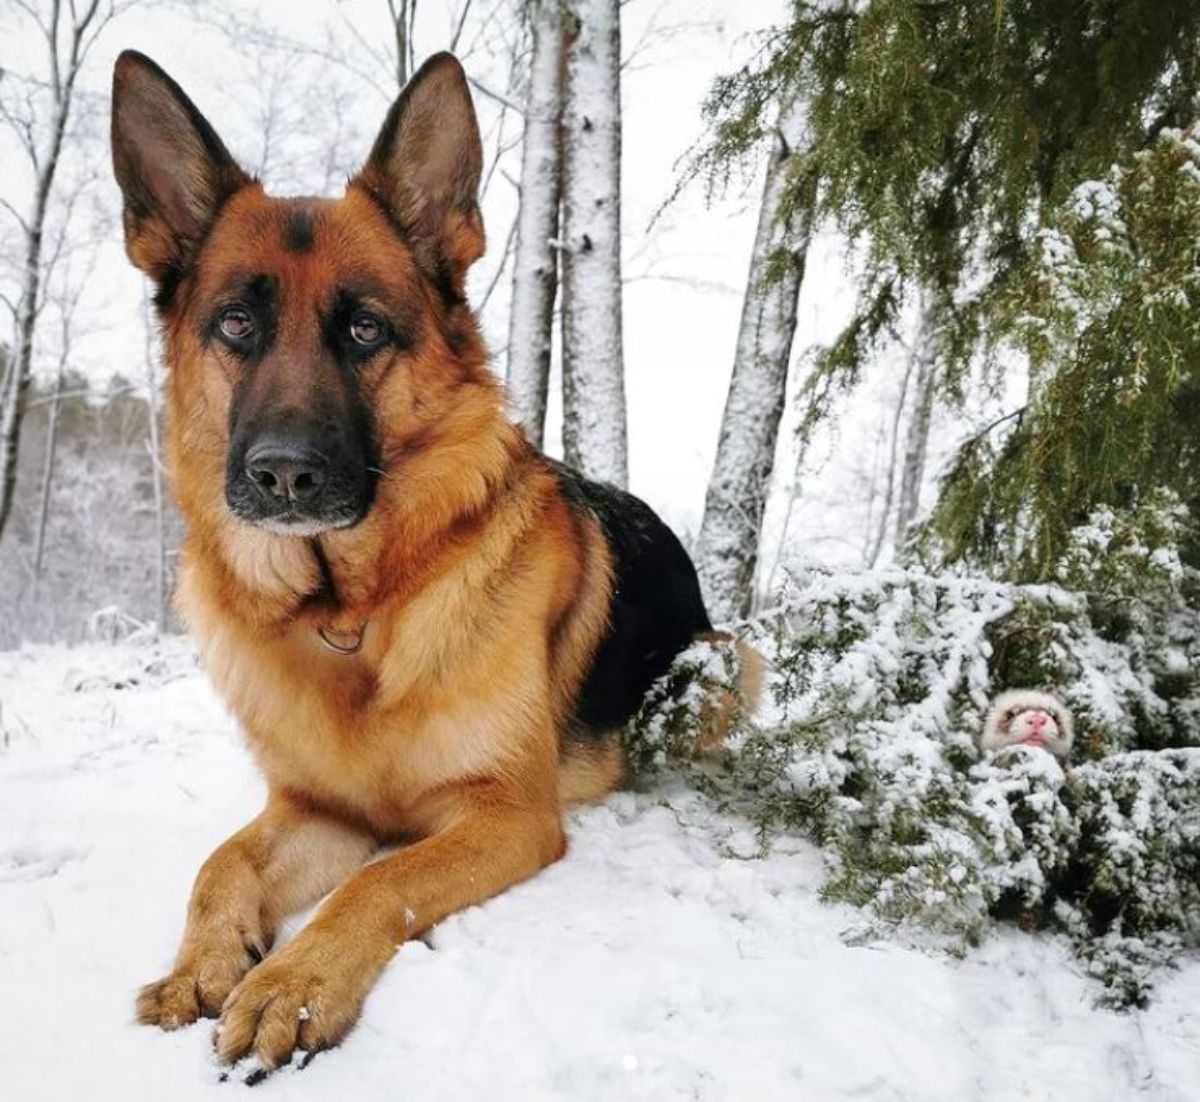 german shepherd laying on snow with a brown and white ferret in the snowy bushes next to the dog